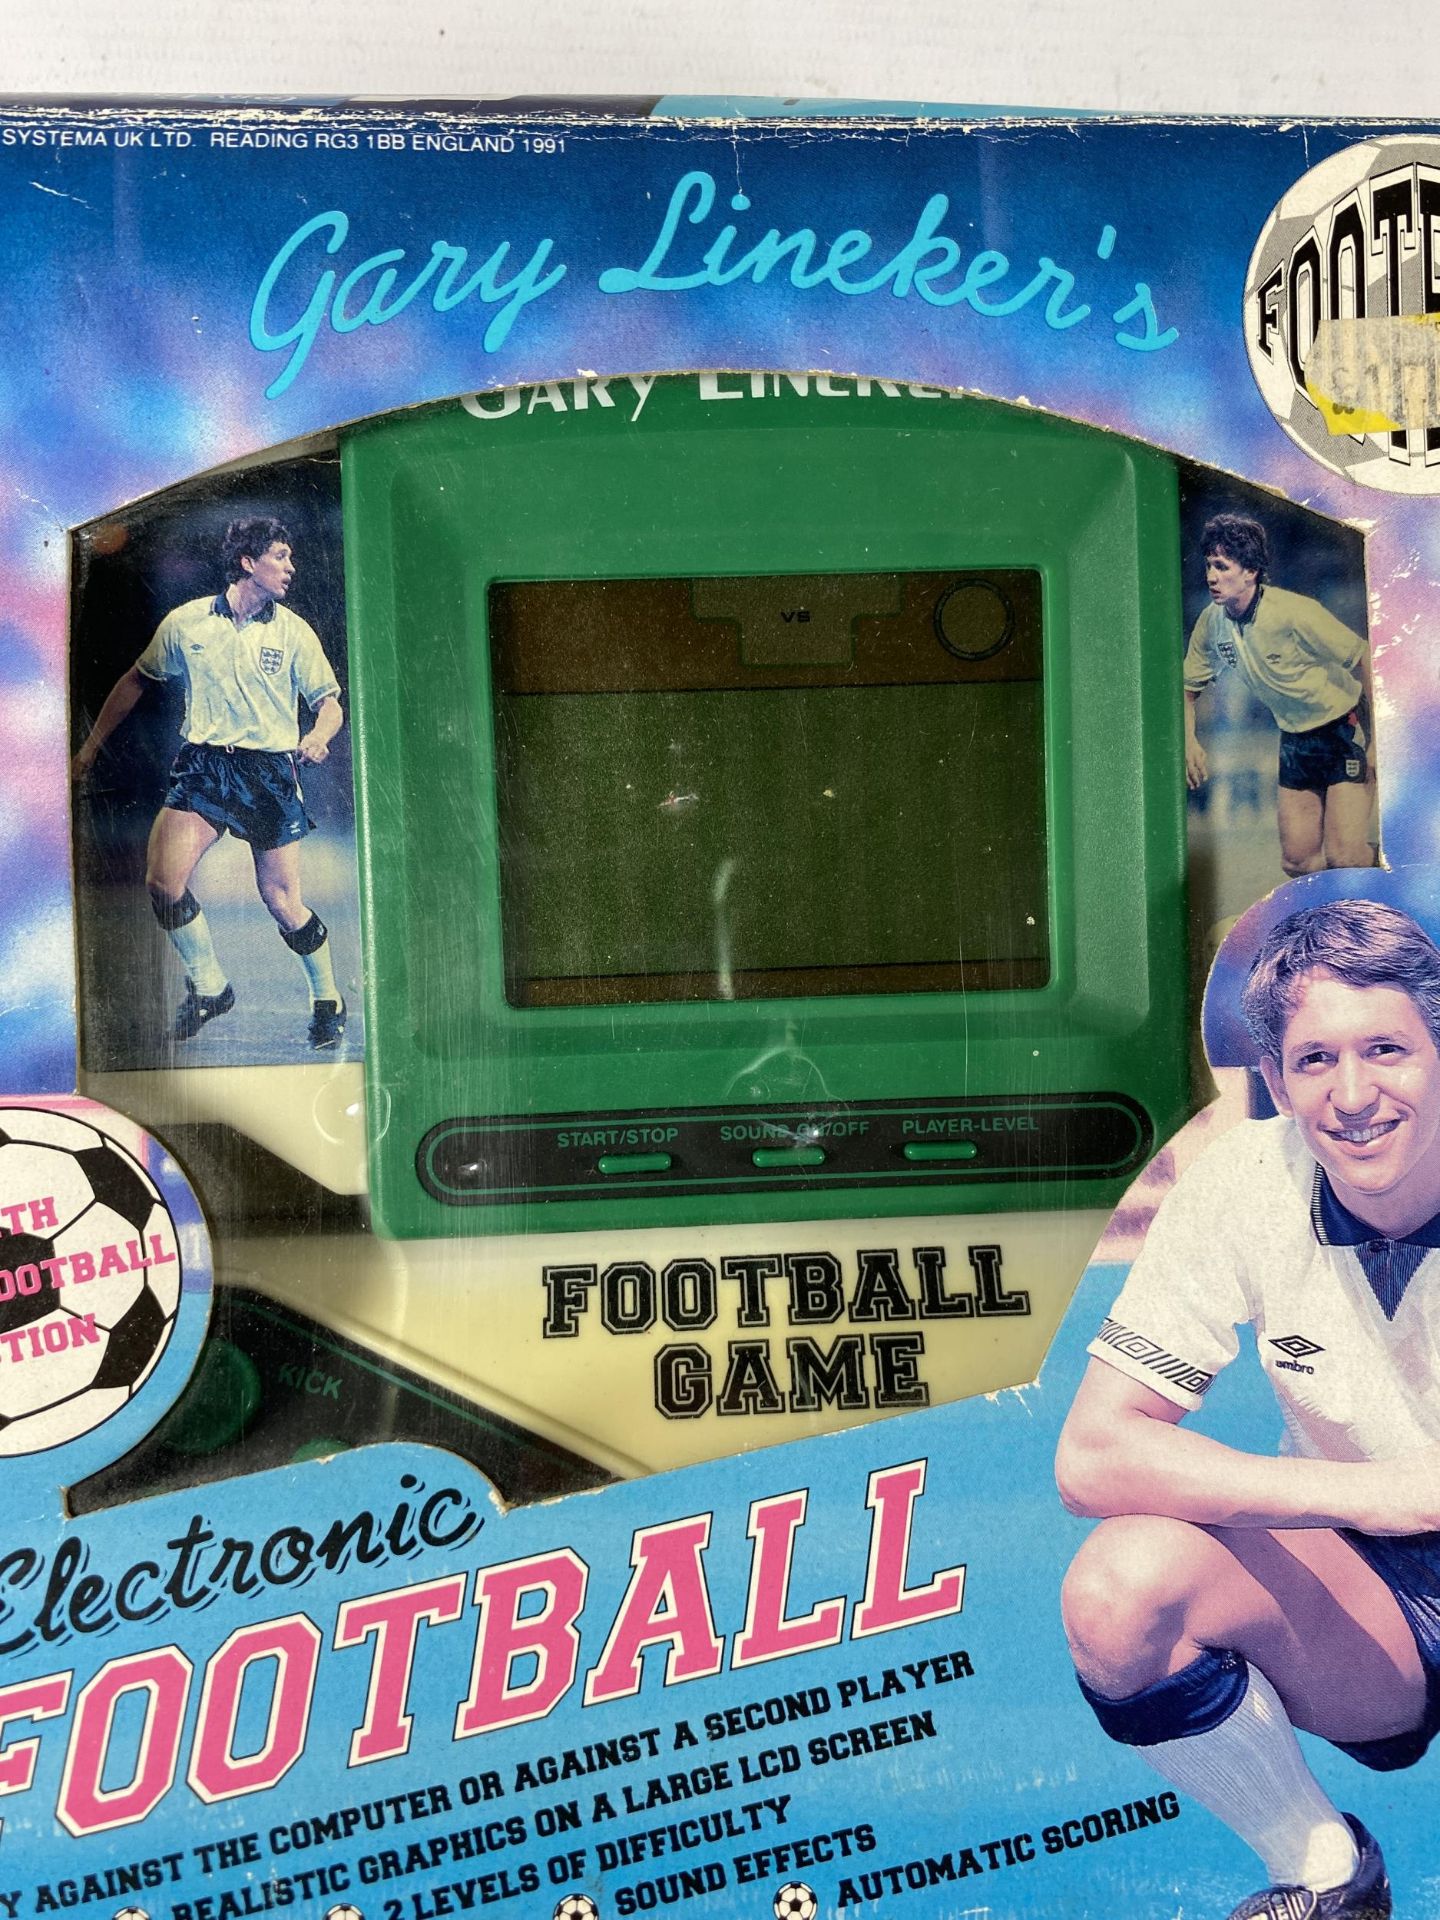 A BOXED RETRO SYSTEMA GARY LINEKER'S ELECTRONIC FOOTBALL GAME - Image 2 of 2